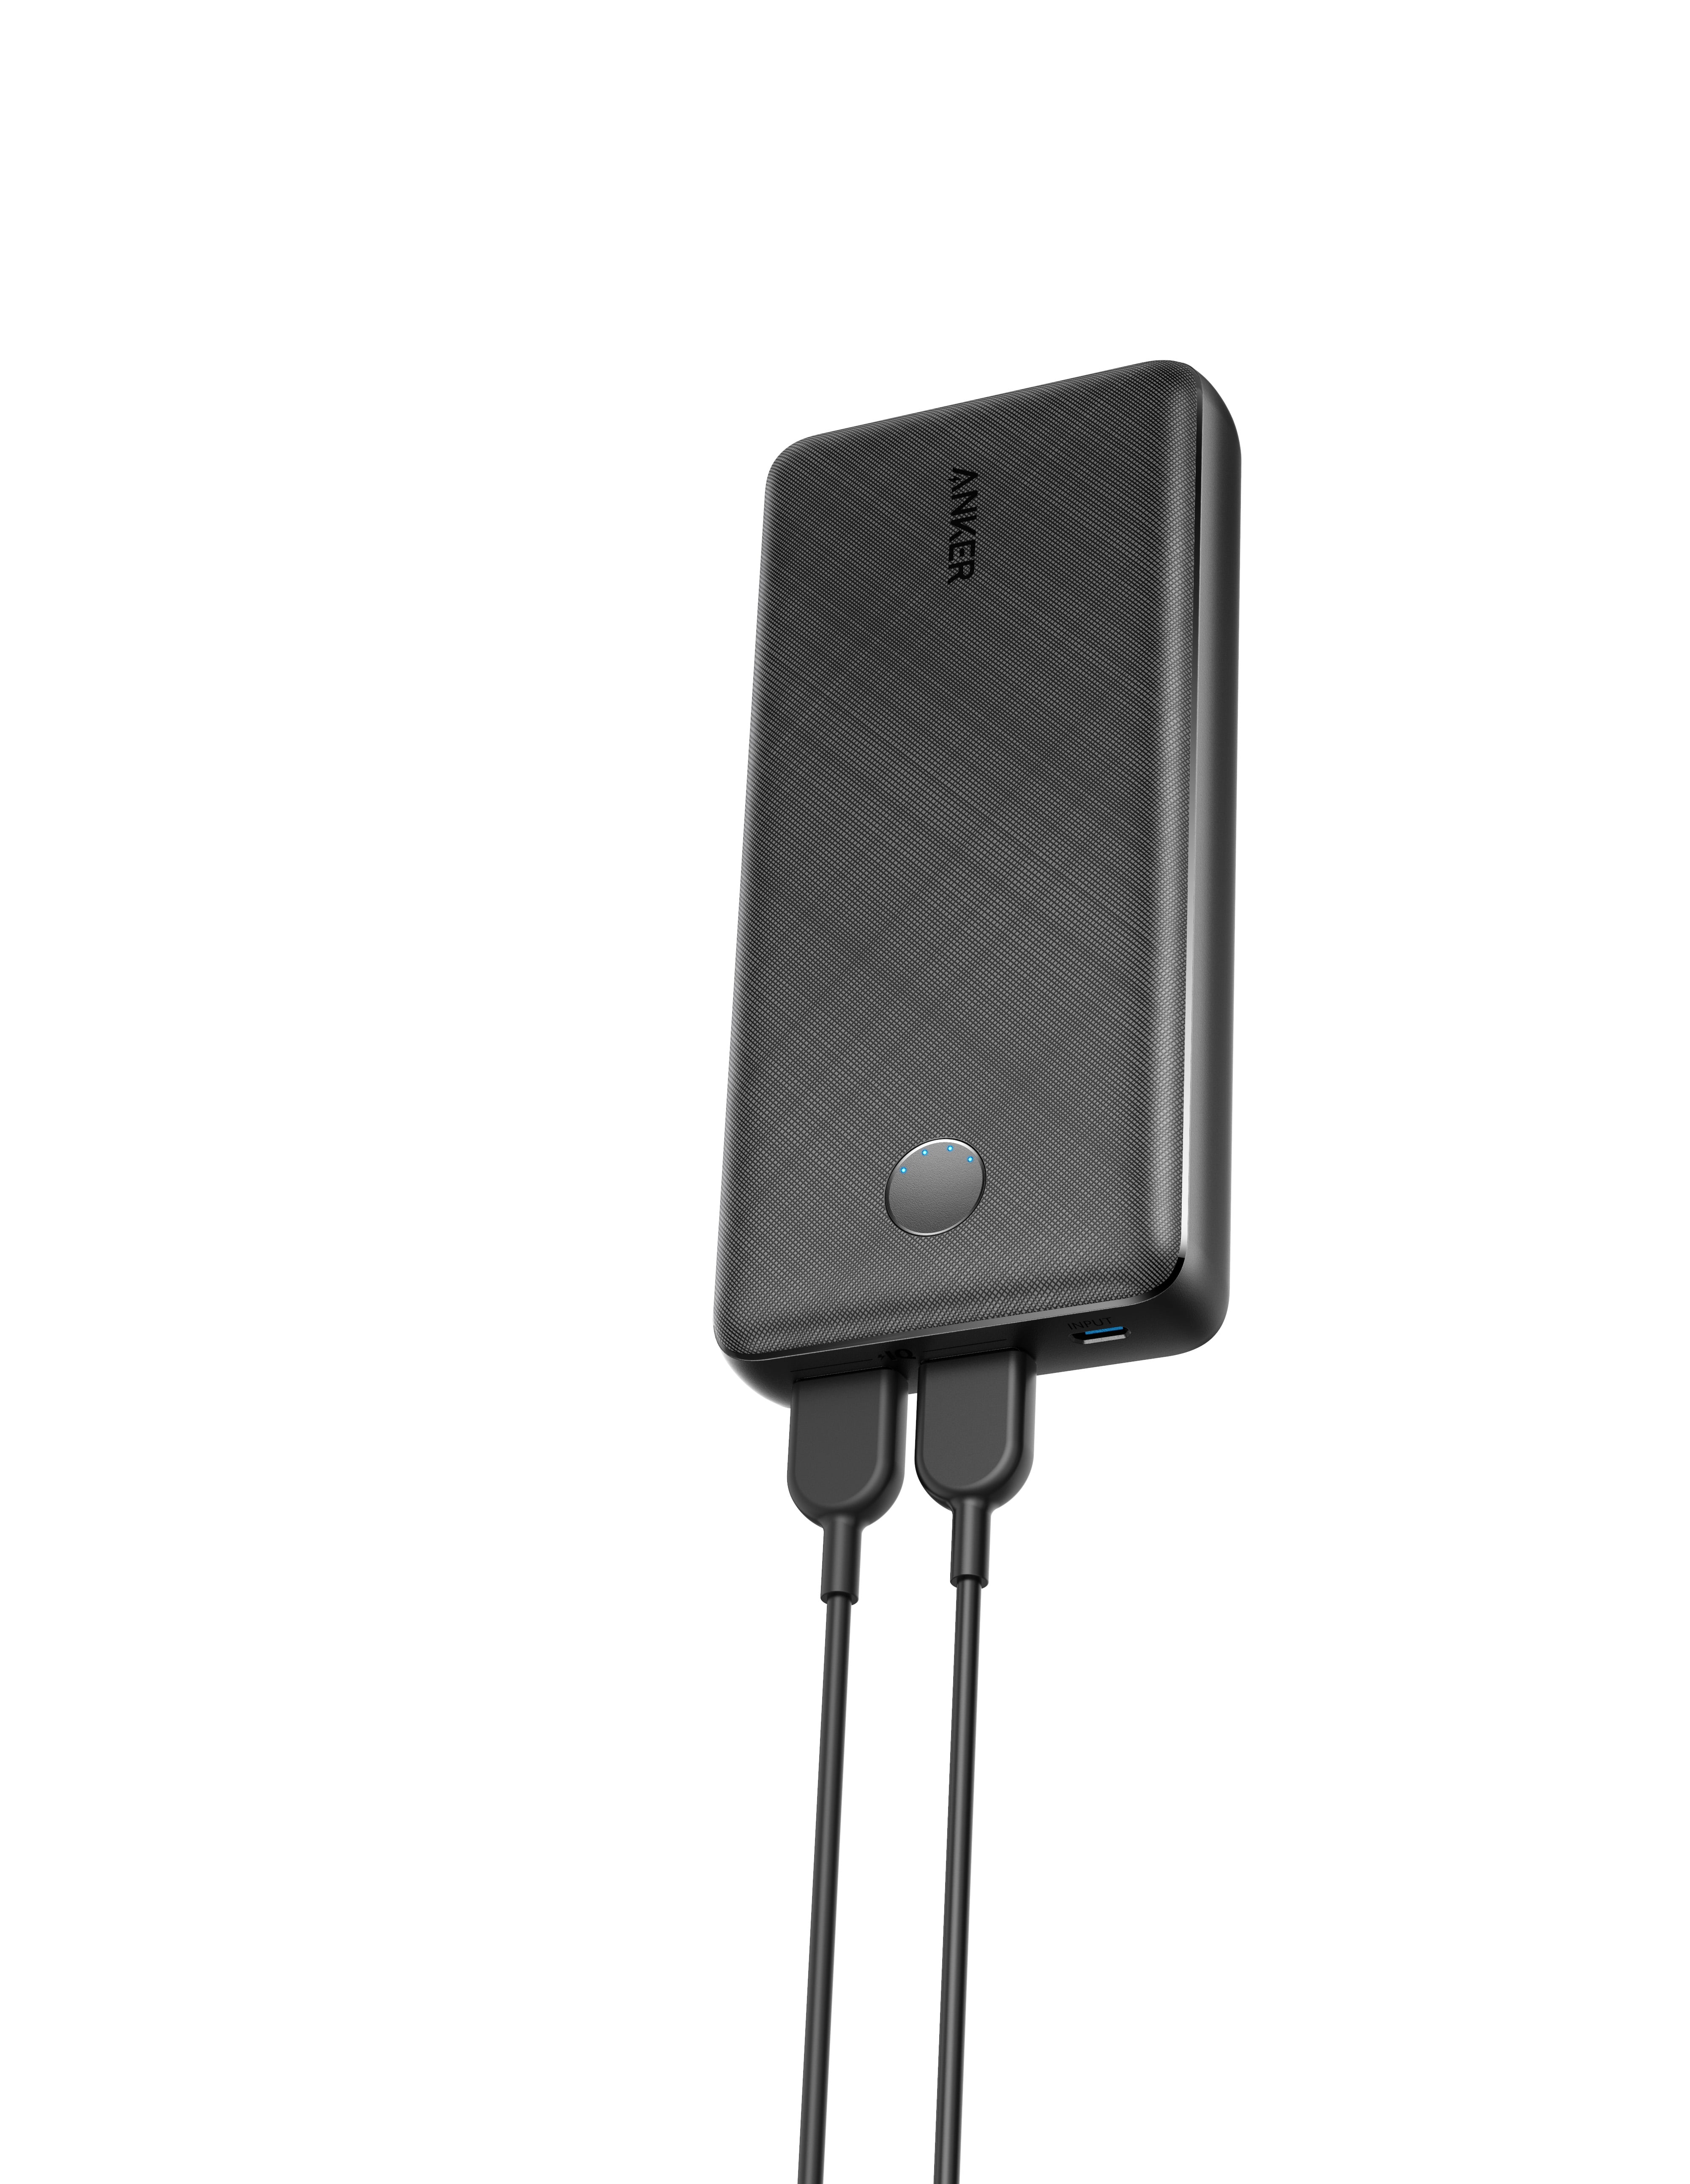 Anker PowerCore Select 10000  2-Port Portable Charger Black